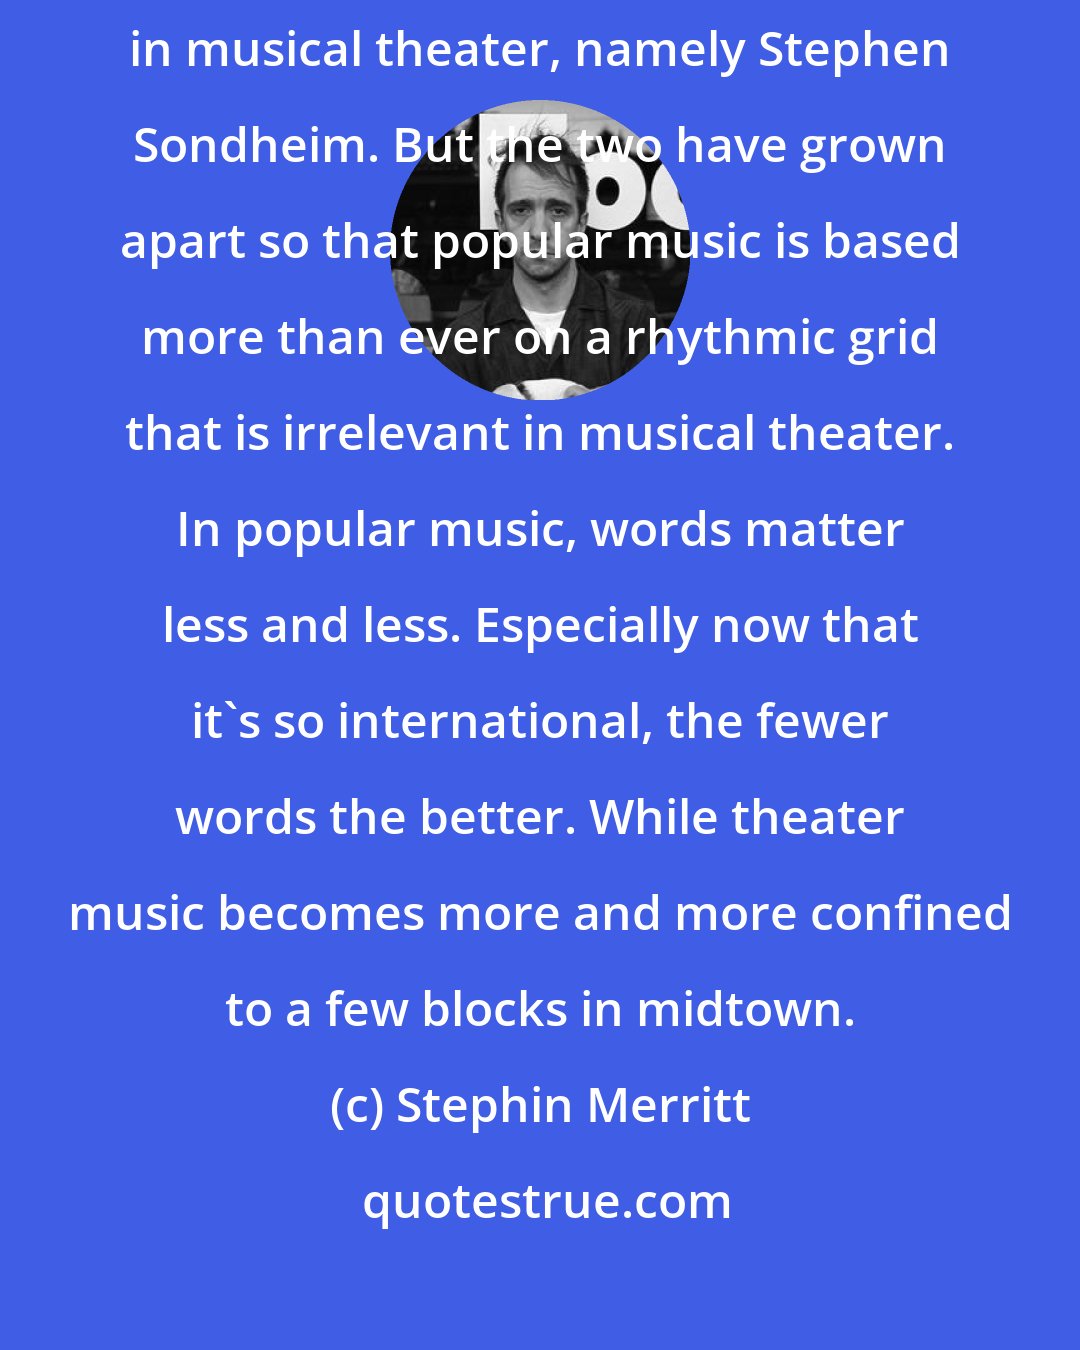 Stephin Merritt: Popular music of the last 50 years has failed to keep in step with advances in musical theater, namely Stephen Sondheim. But the two have grown apart so that popular music is based more than ever on a rhythmic grid that is irrelevant in musical theater. In popular music, words matter less and less. Especially now that it's so international, the fewer words the better. While theater music becomes more and more confined to a few blocks in midtown.